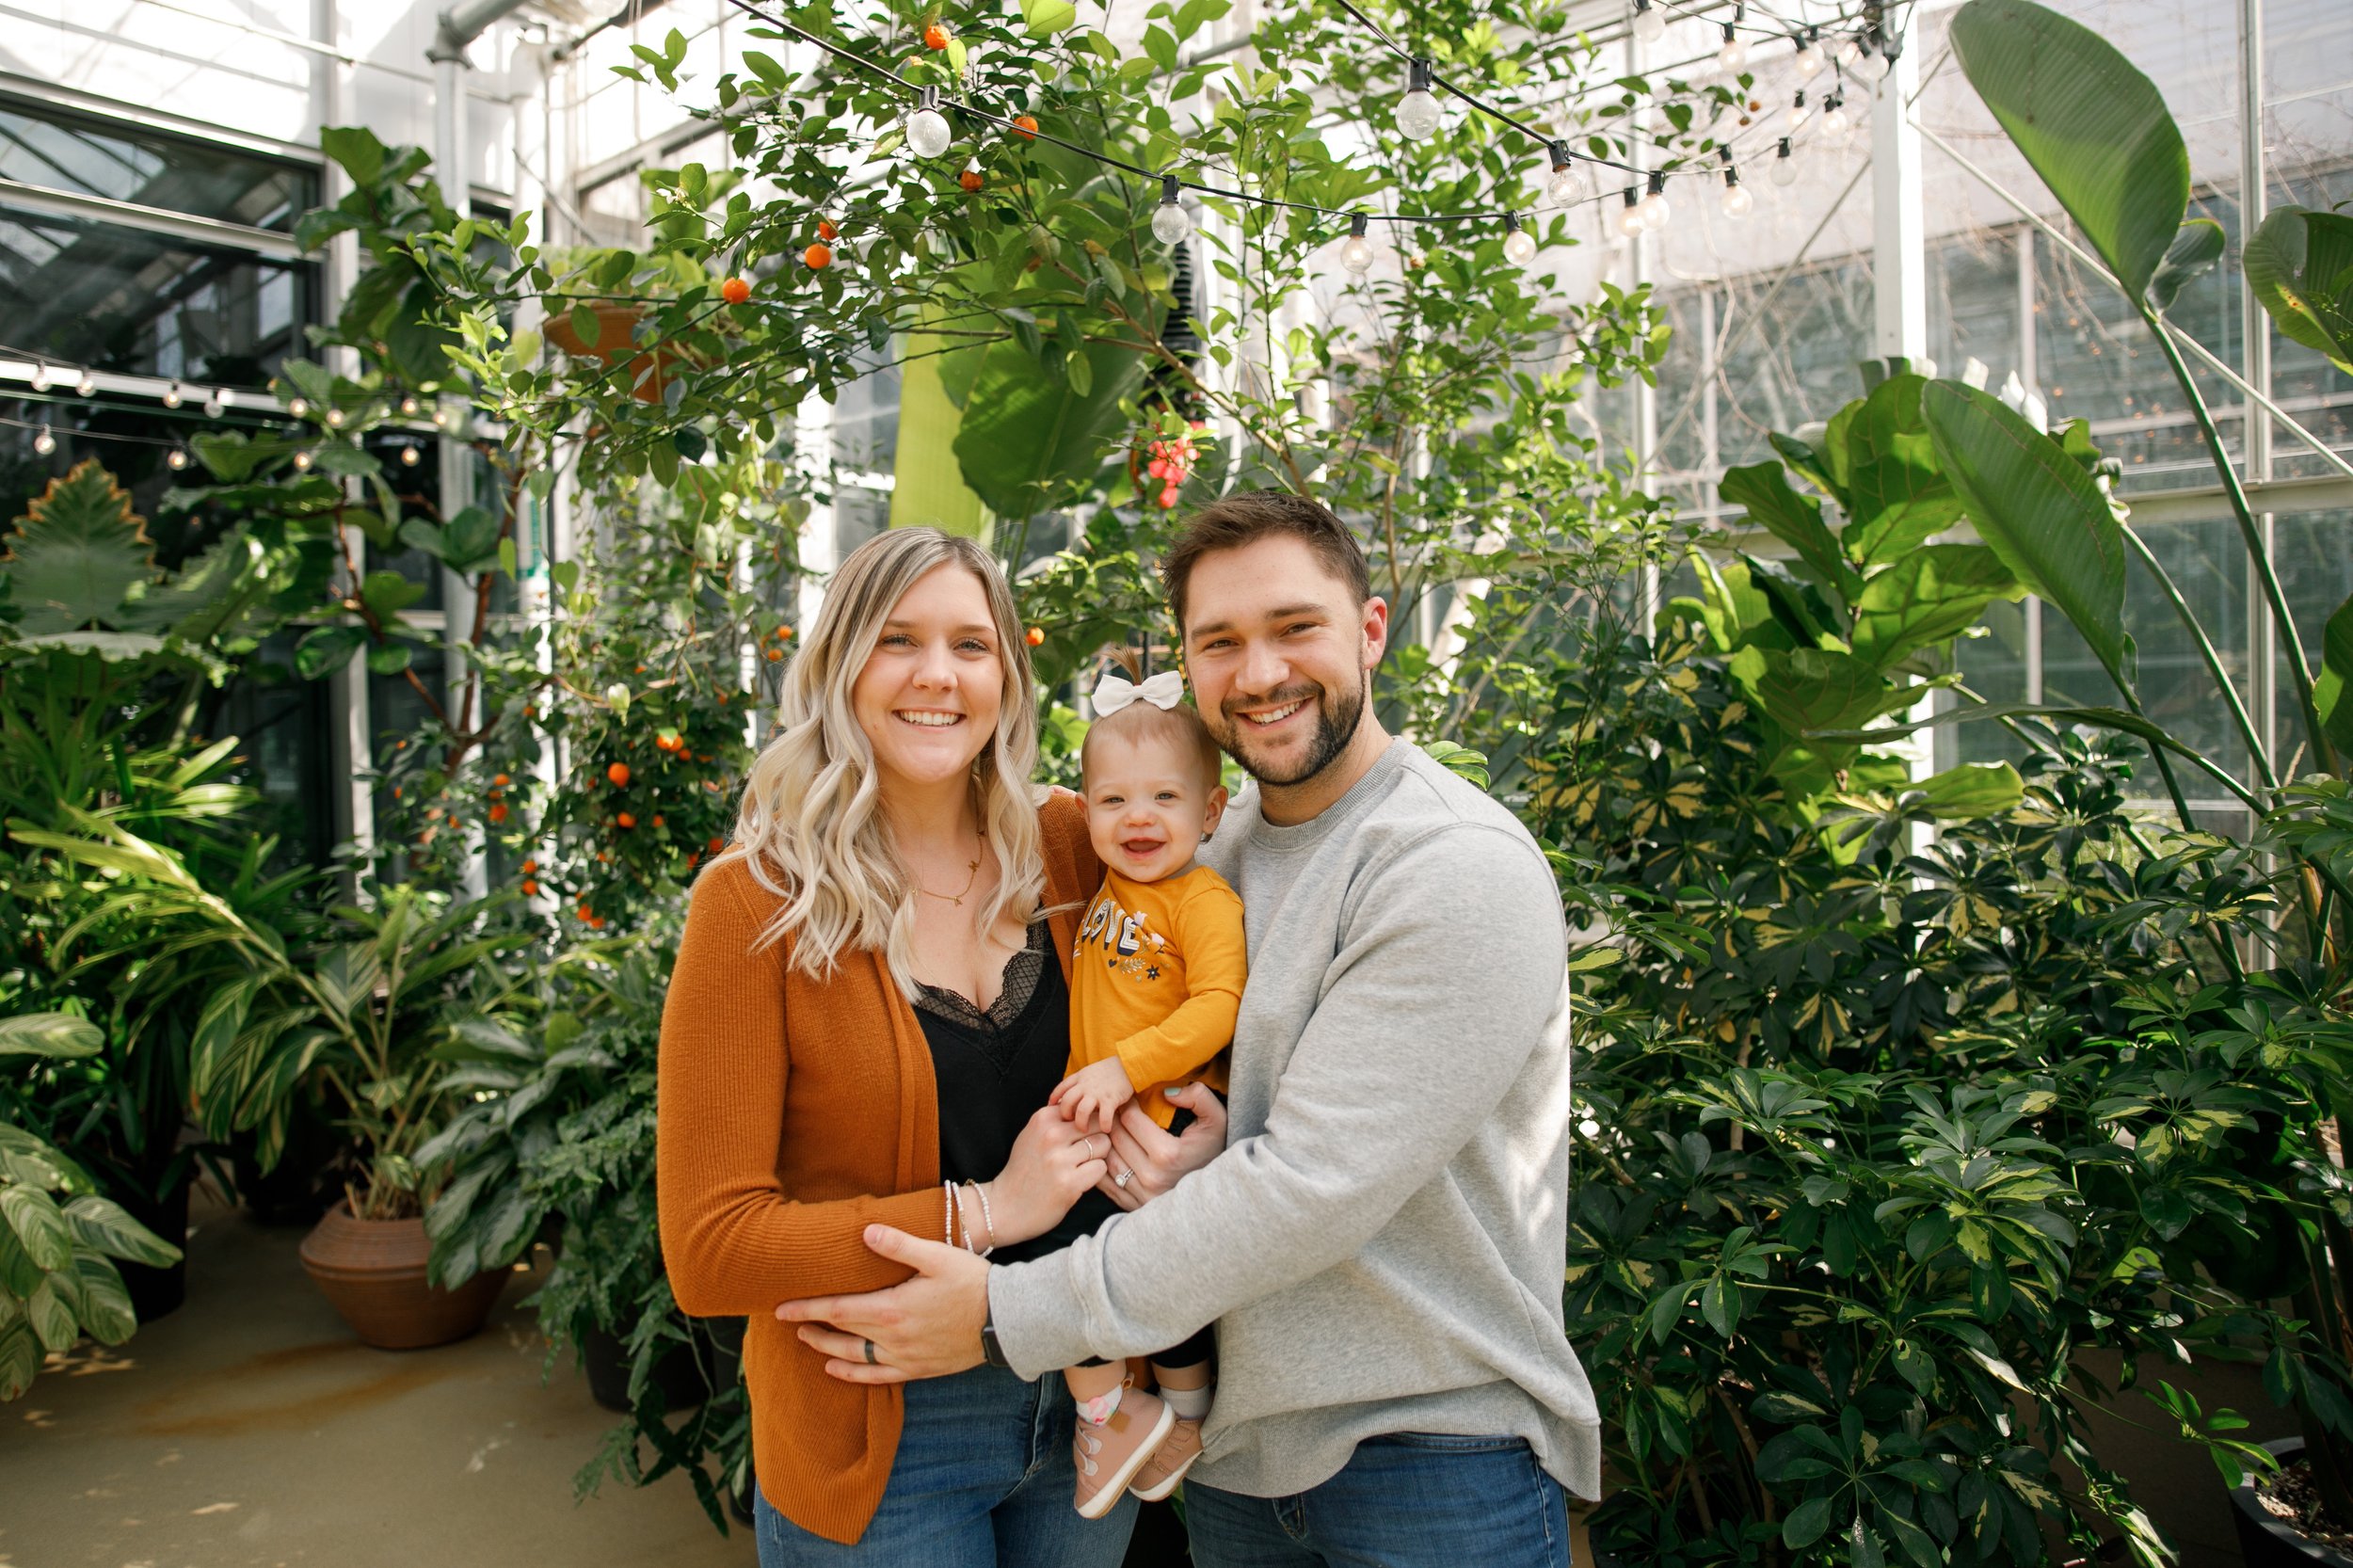 Downtown Market Greenhouse - Grand Rapids Family Photographer - Greenhouse Family Session - Downtown Market Grand Rapids - Vachon Family - J Darling Photo01.jpg